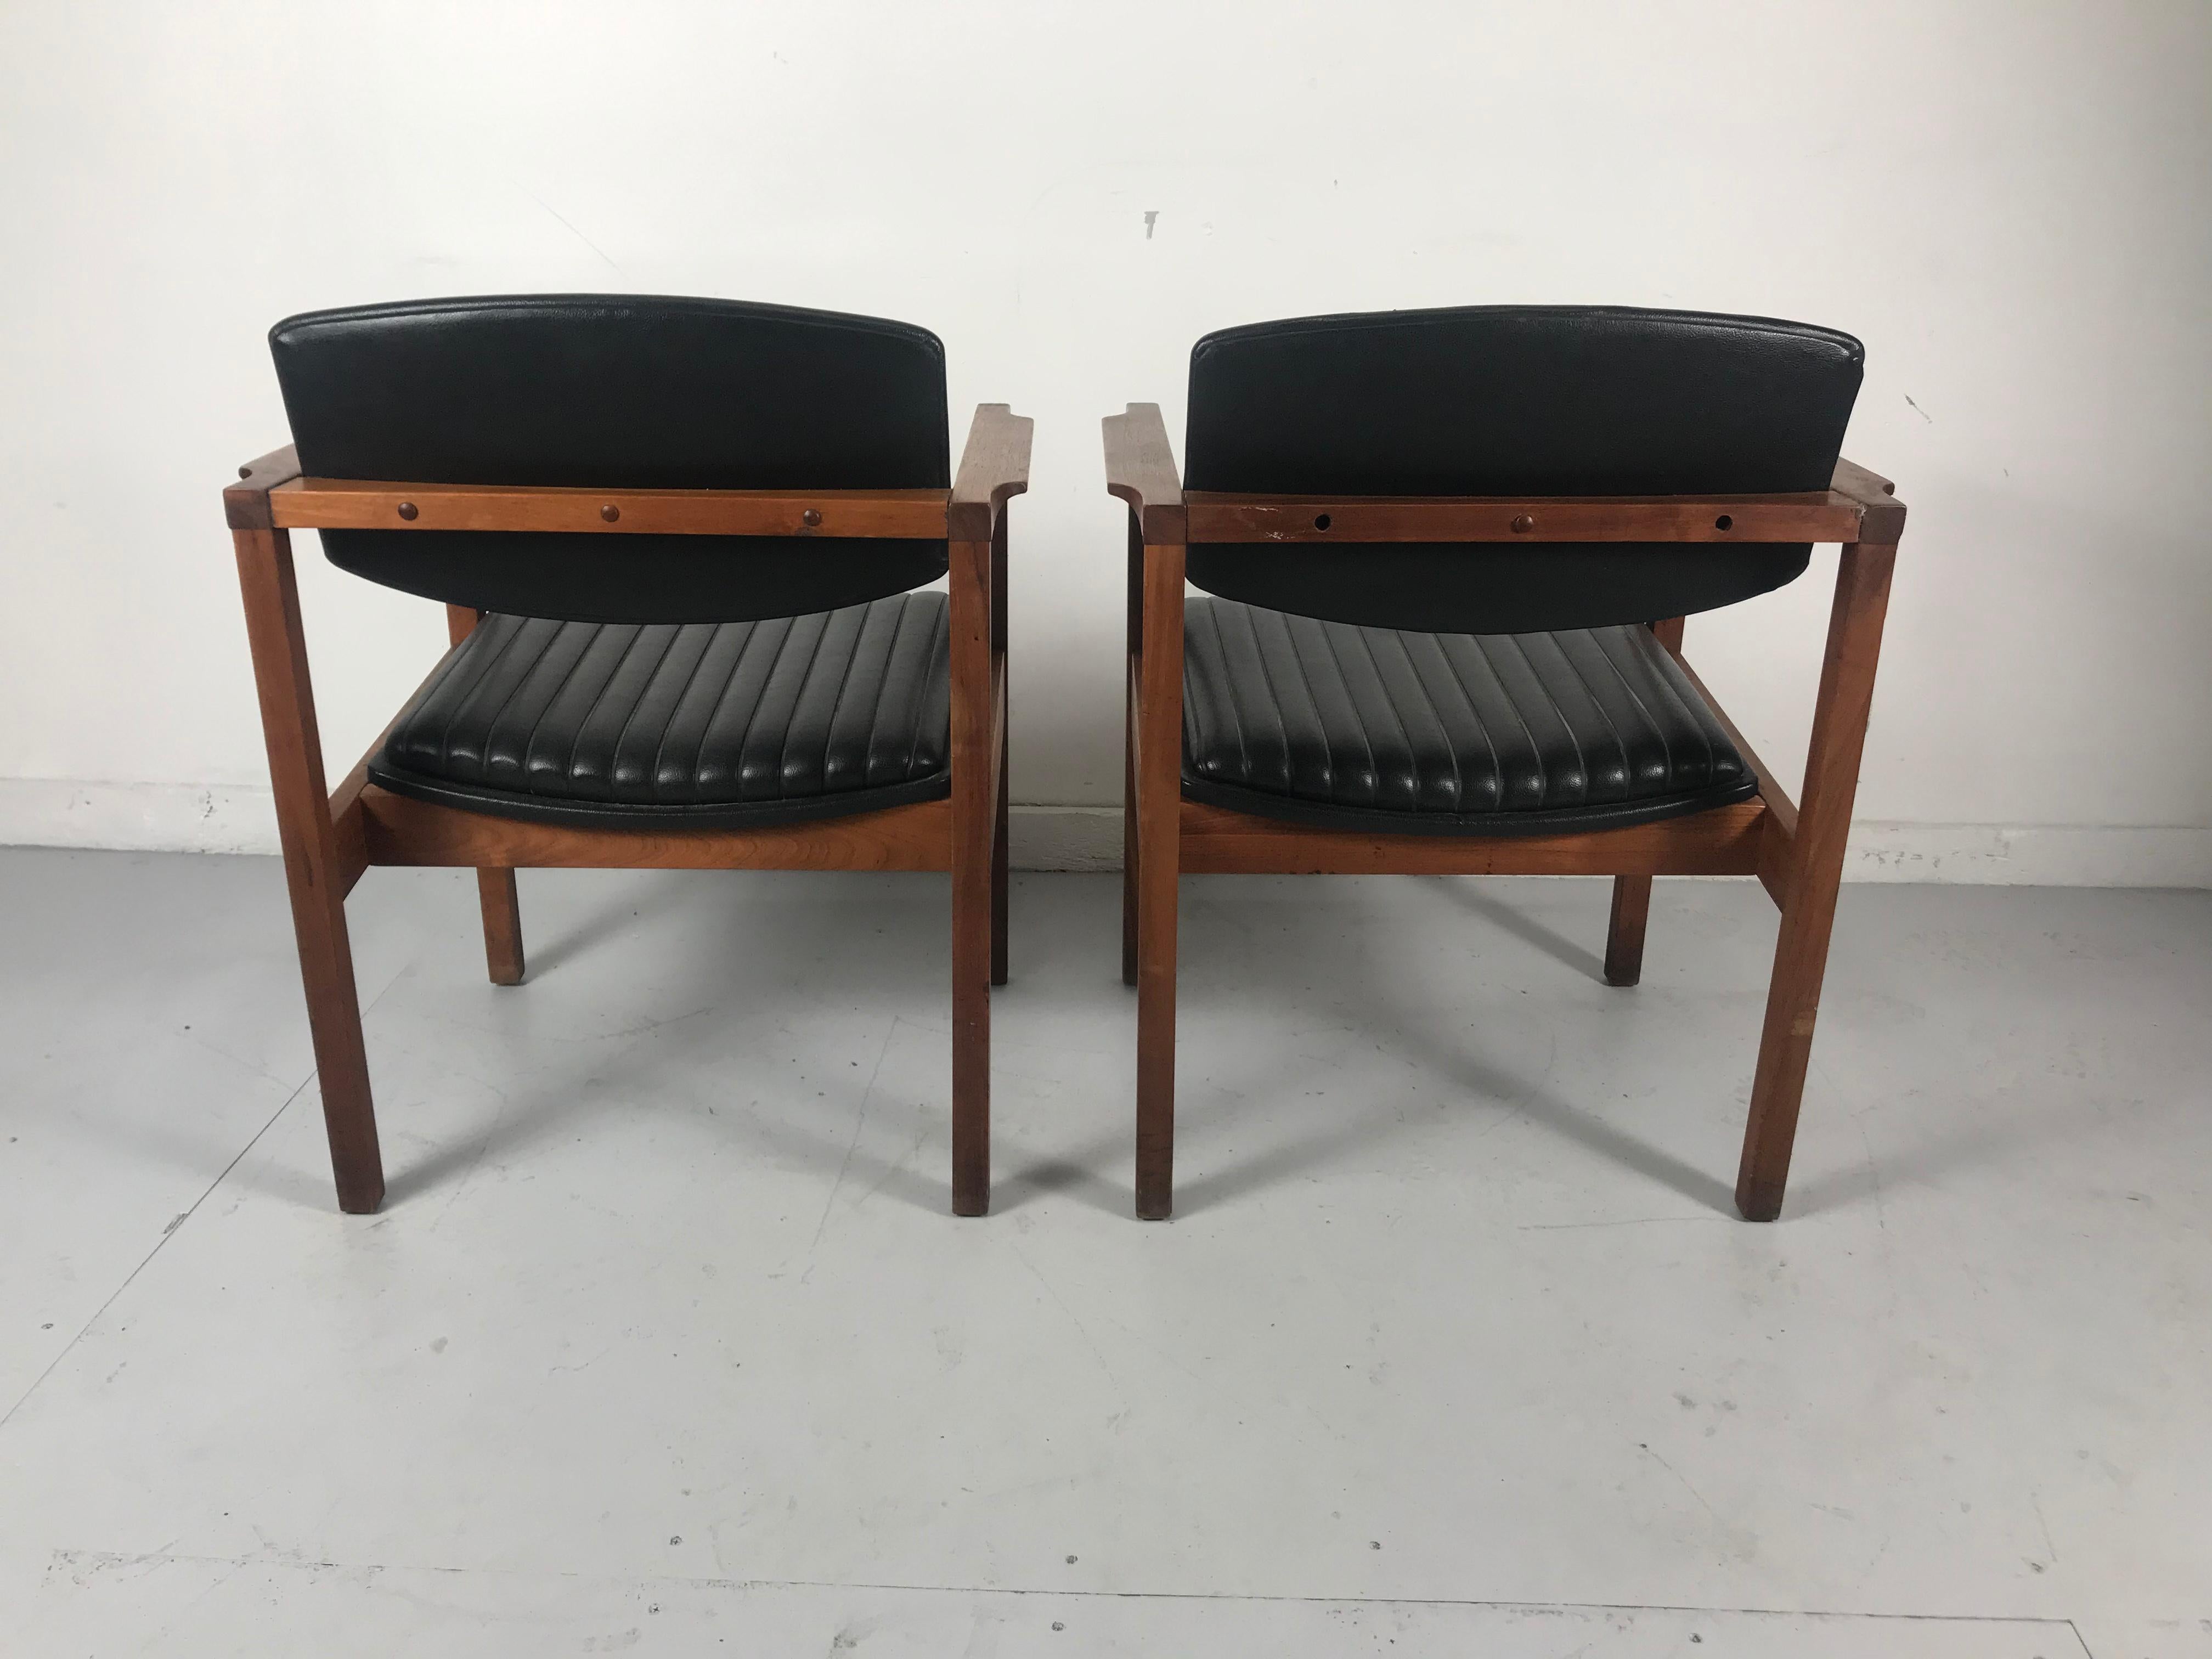 Pair Modernist Walnut and Channeled Naugahyde Lounge Chairs Attr. to Jens Risom For Sale 1